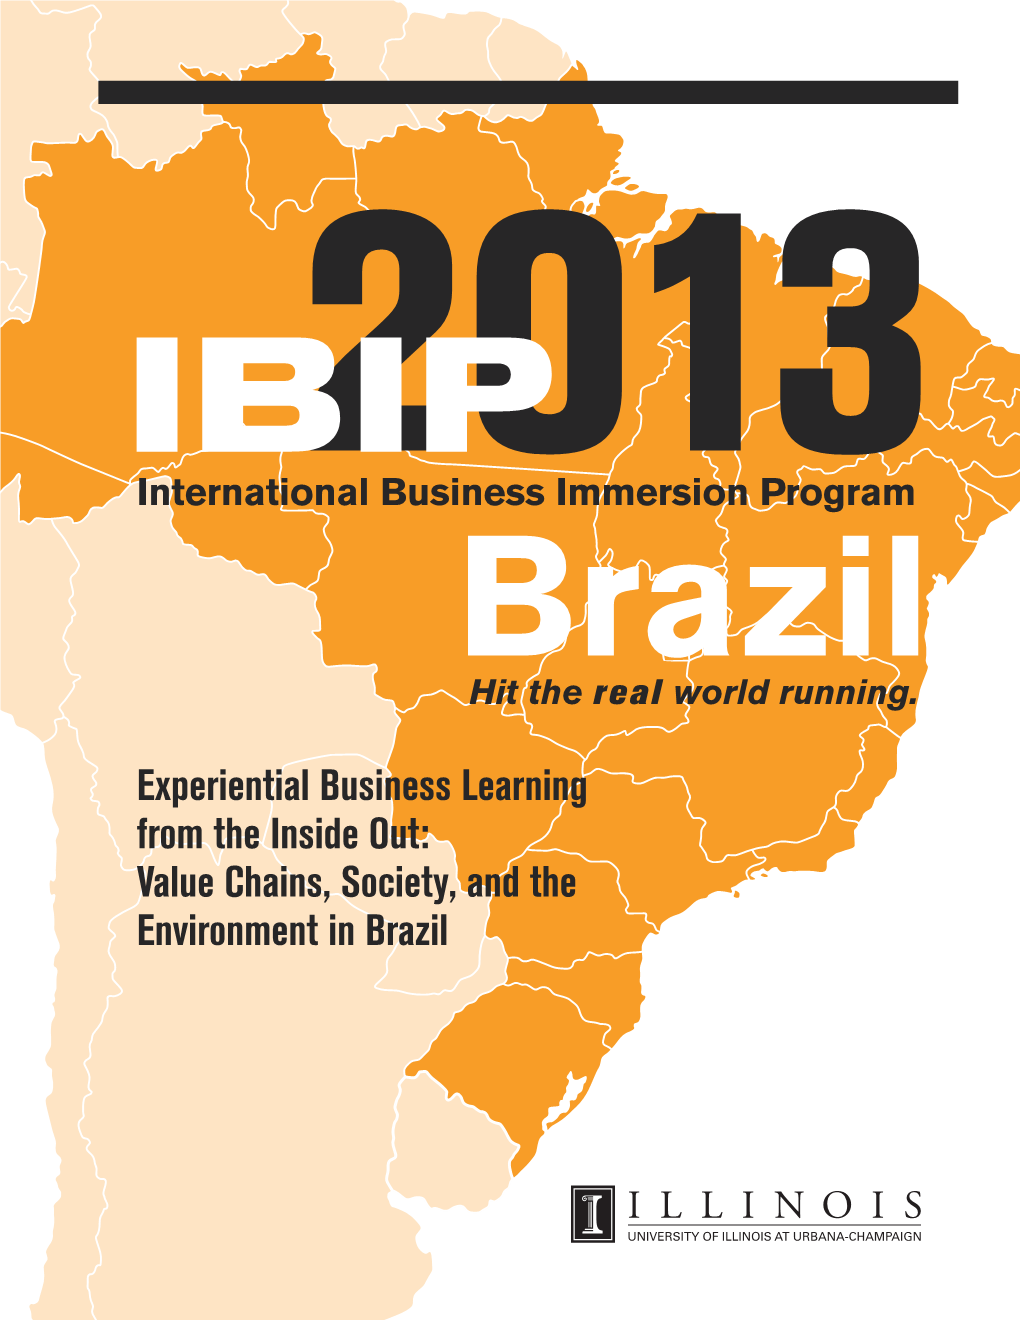 Experiential Business Learning from the Inside Out: Value Chains, Society, and the Environment in Brazil